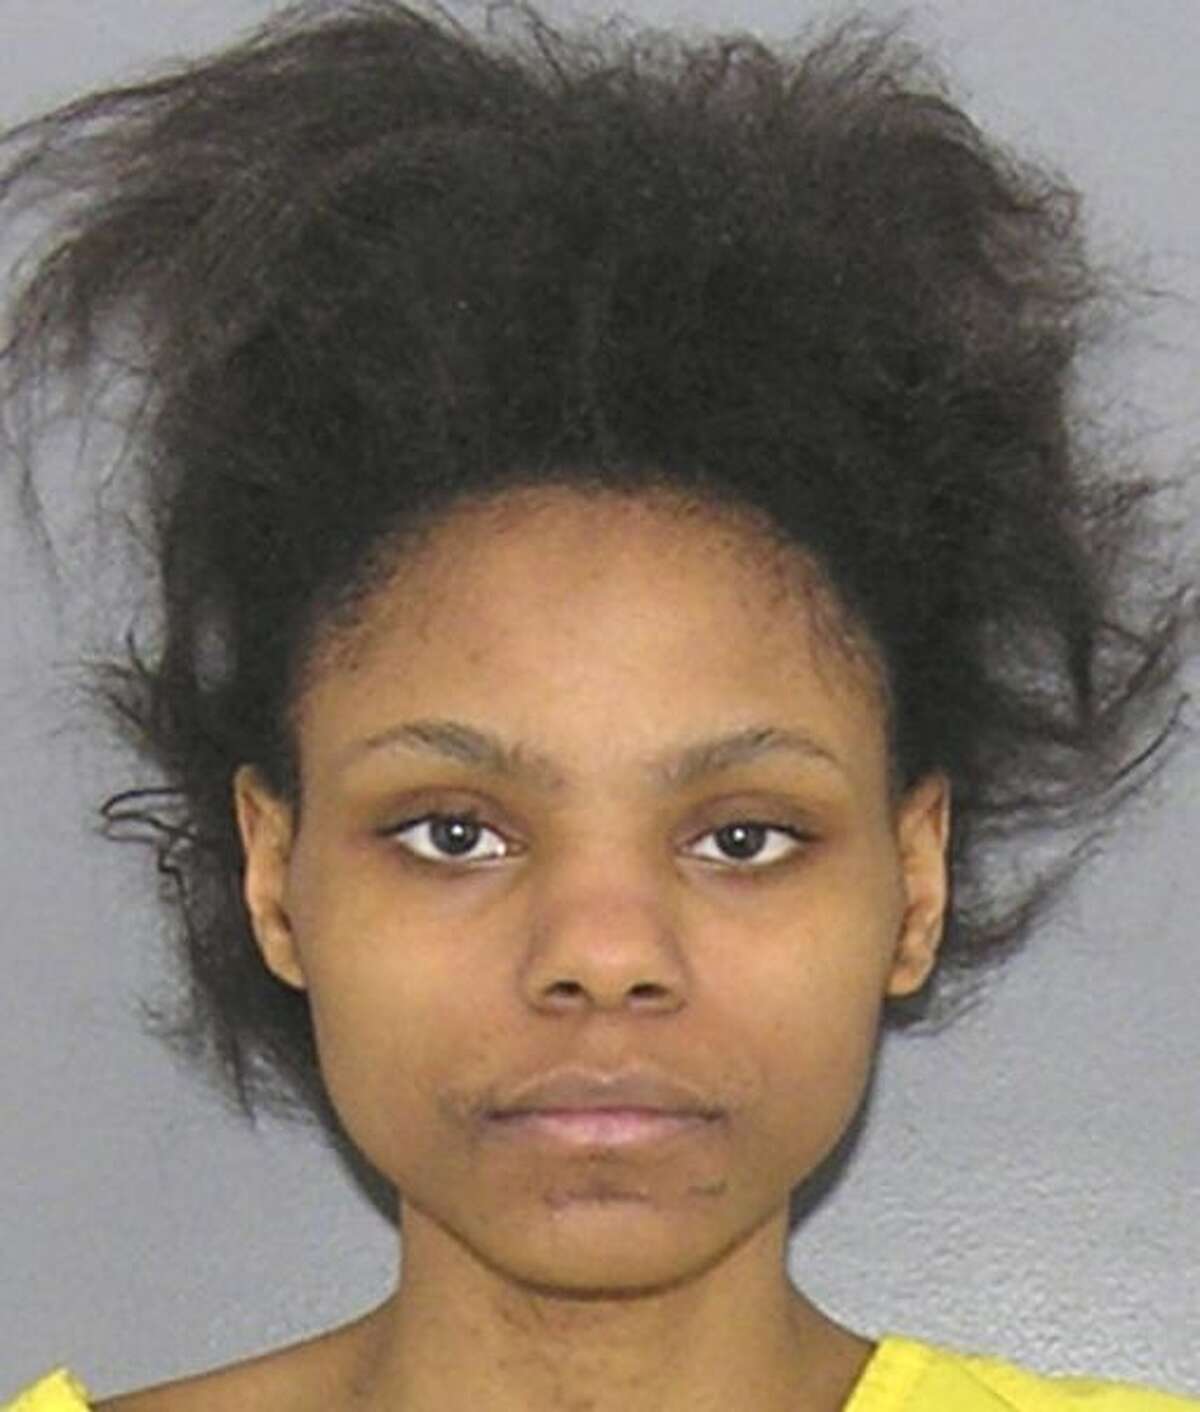 FILE - This booking photo provided by the Hamilton County, Ohio Sheriff shows Deasia Watkins in Cincinnati. Accused of decapitating her 3-month-old daughter with a chef's knife, Watkins was indicted Wednesday, March 25, 2015 on a charge of aggravated murder. (AP Photo/Hamilton County Sheriff)